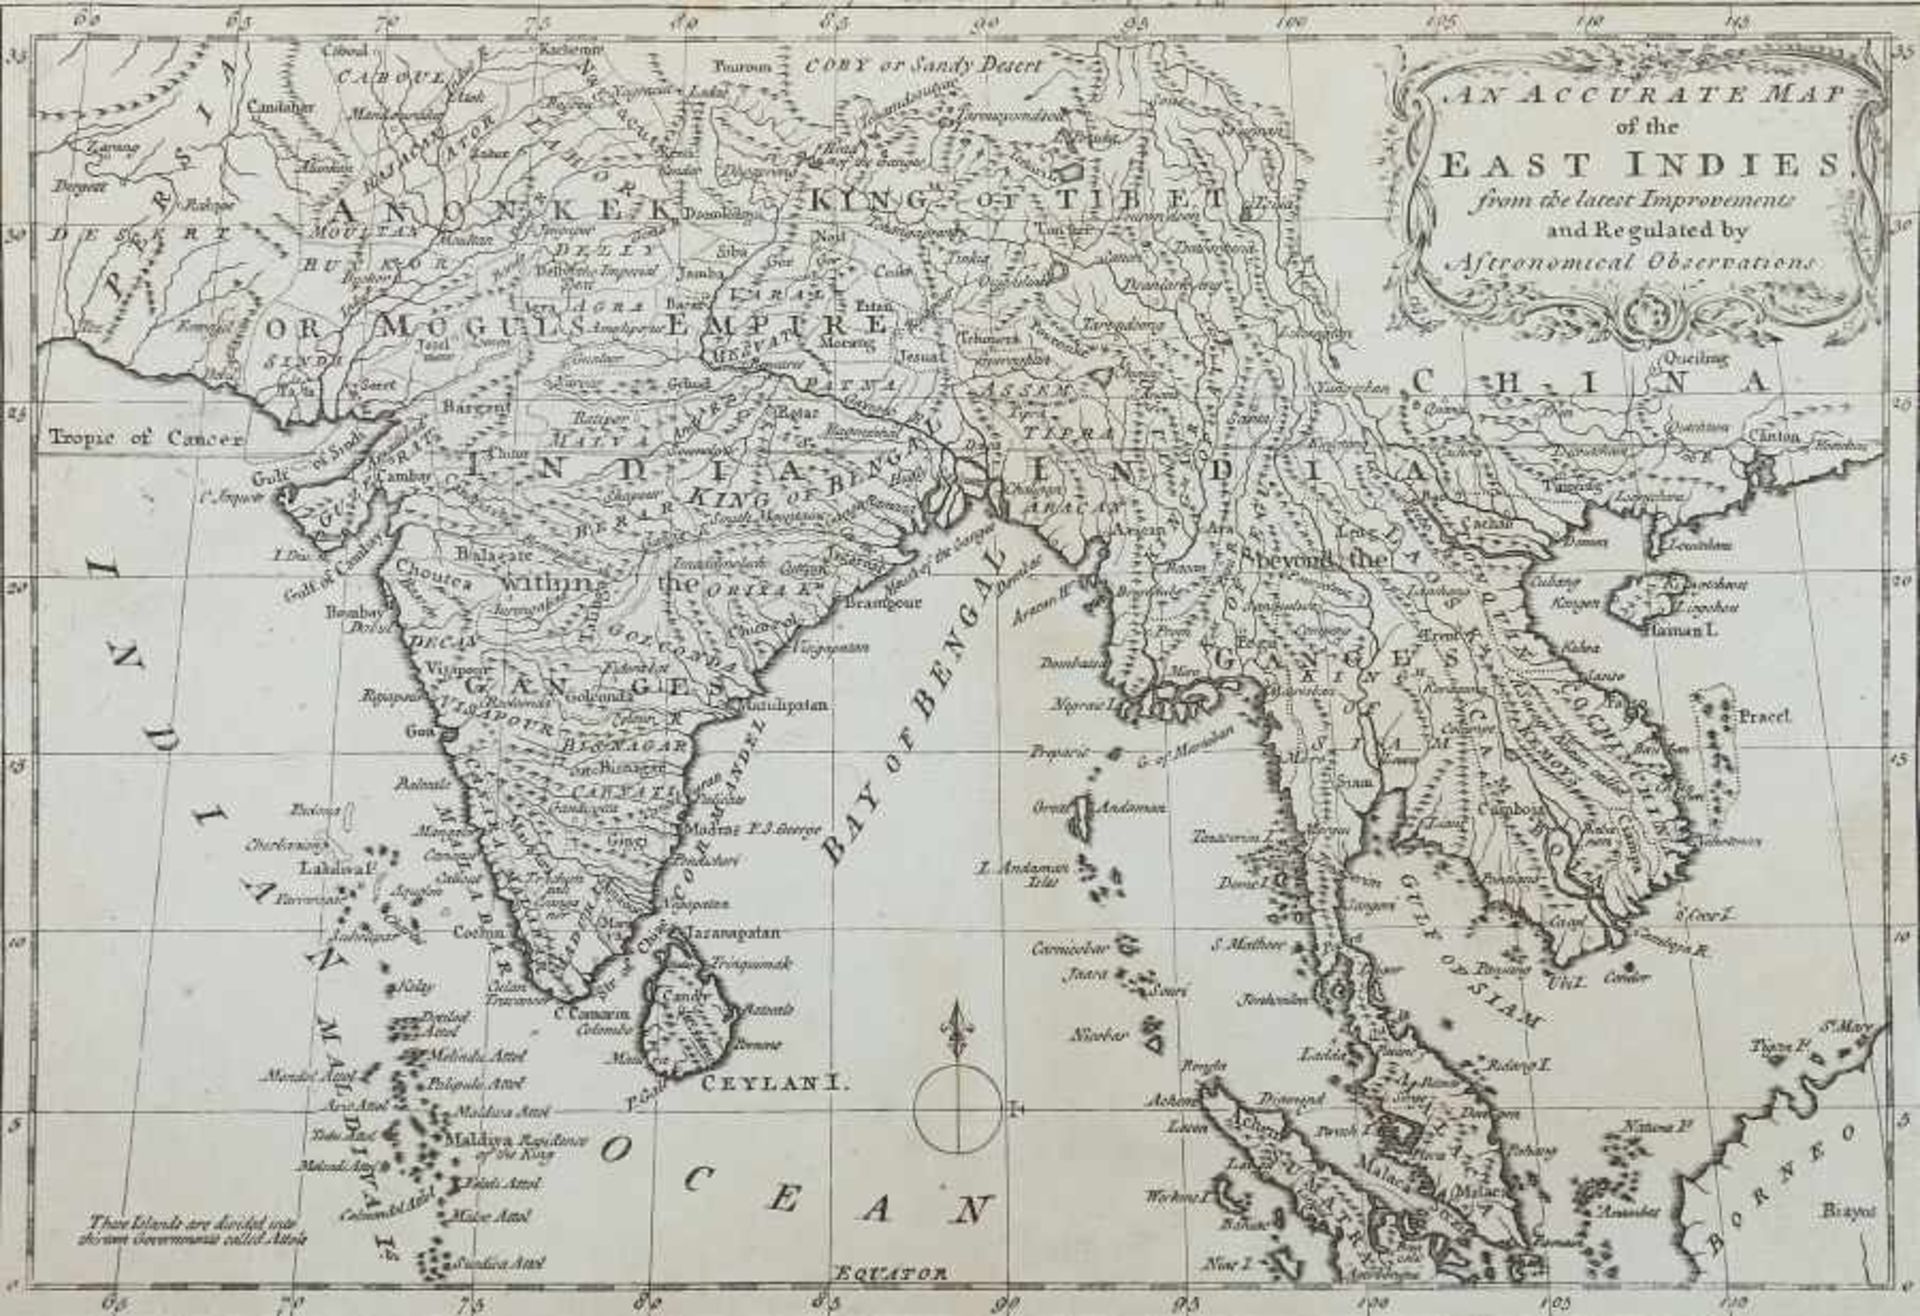 Bowen, Thomas ? - 1790. "An Accurate Map of the East Indies, from the latest Improvements and